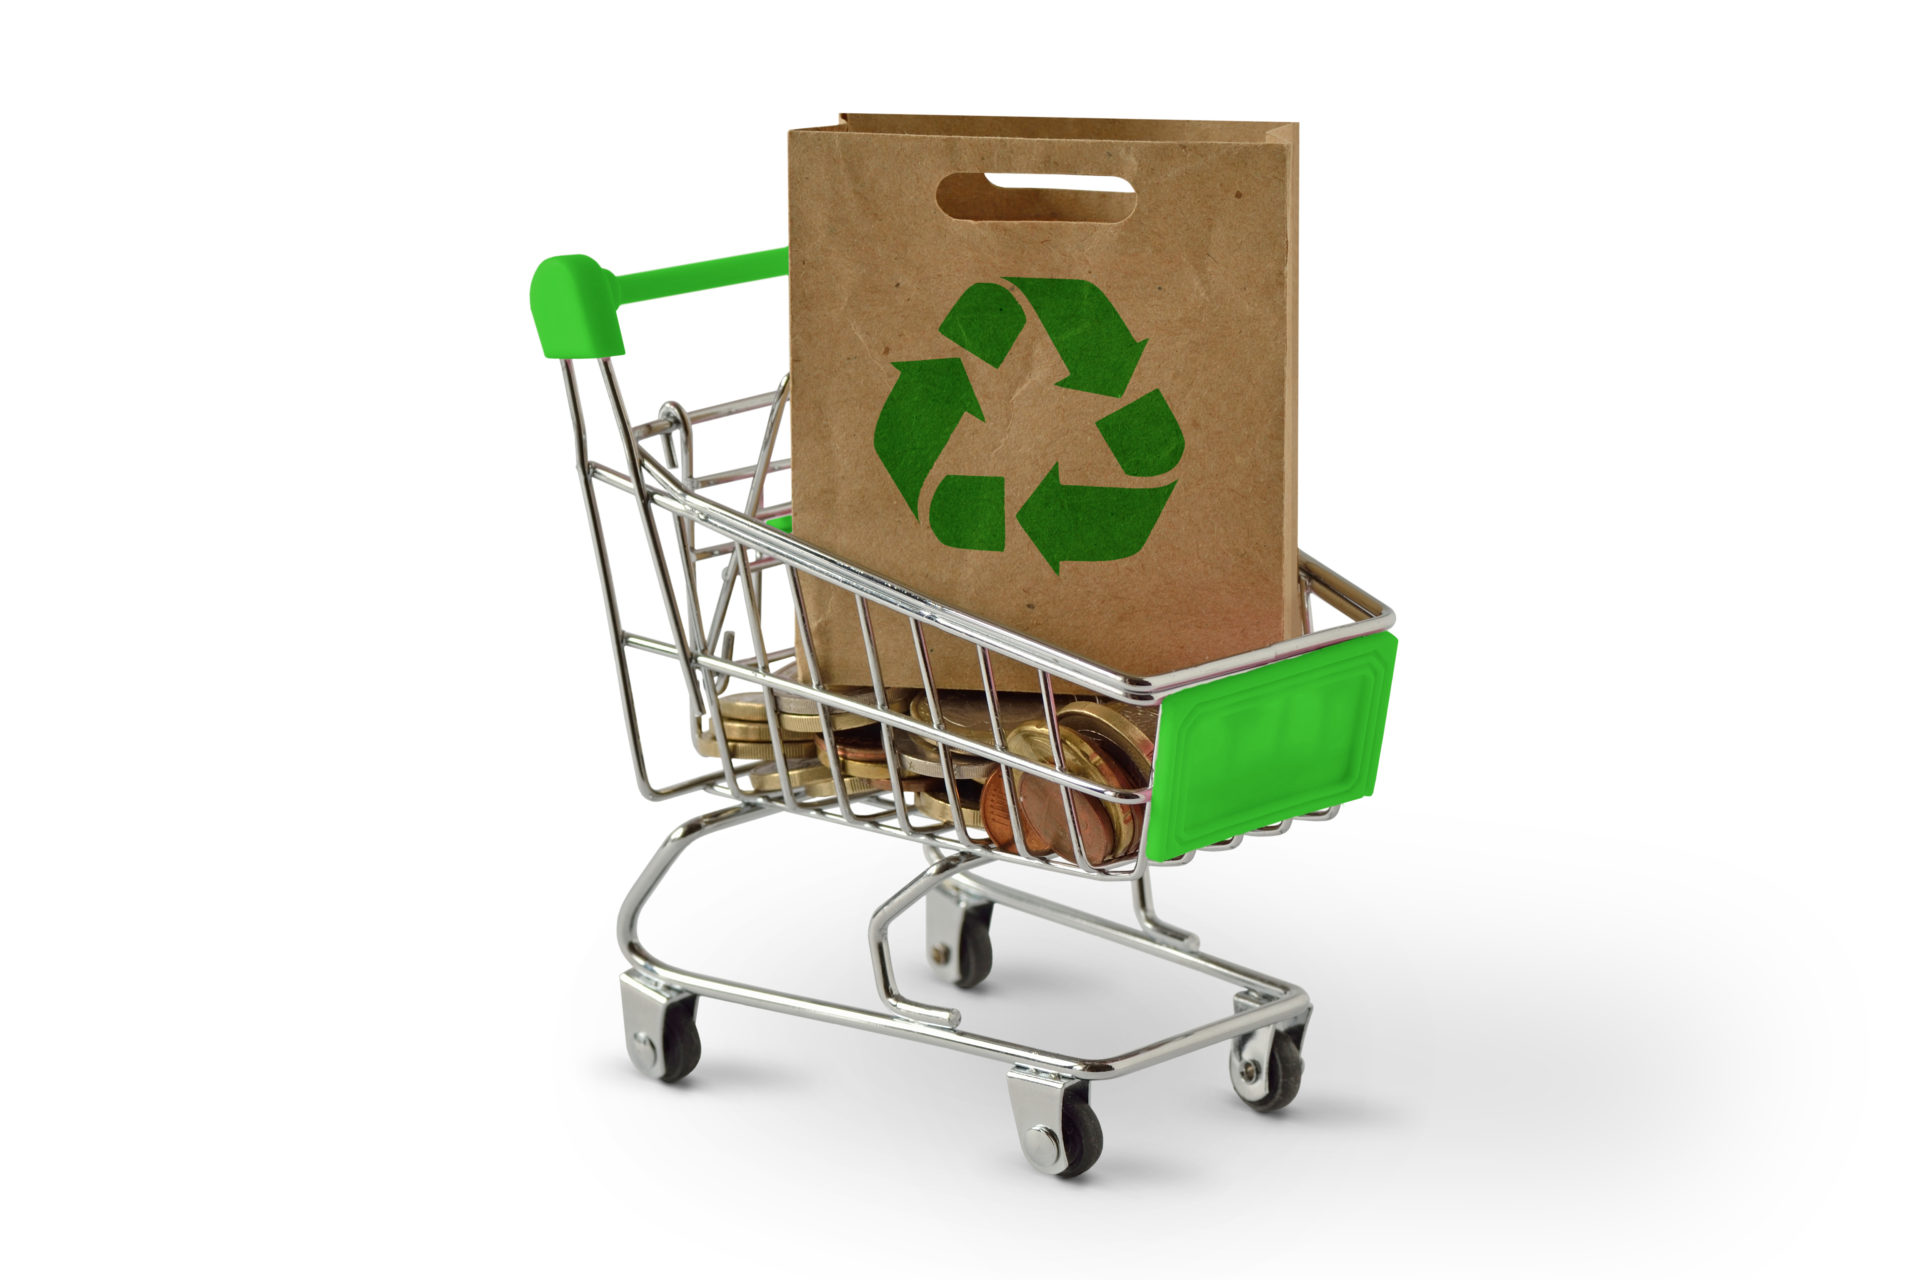 Sustainable Packaging Investment Accelerates